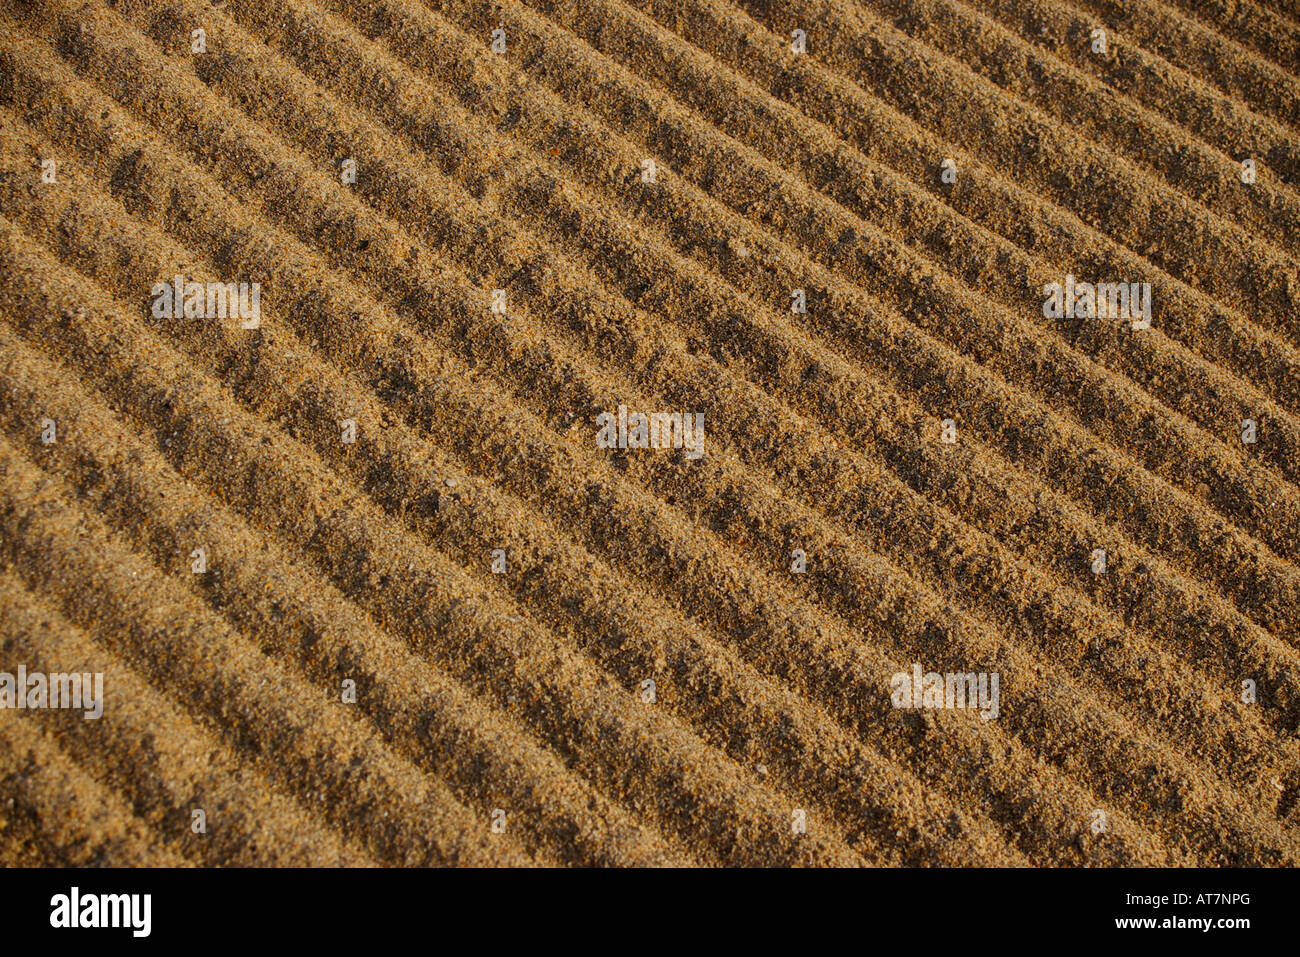 rhythm in repeated forms of the mark of a rake on the sand of the beach Stock Photo